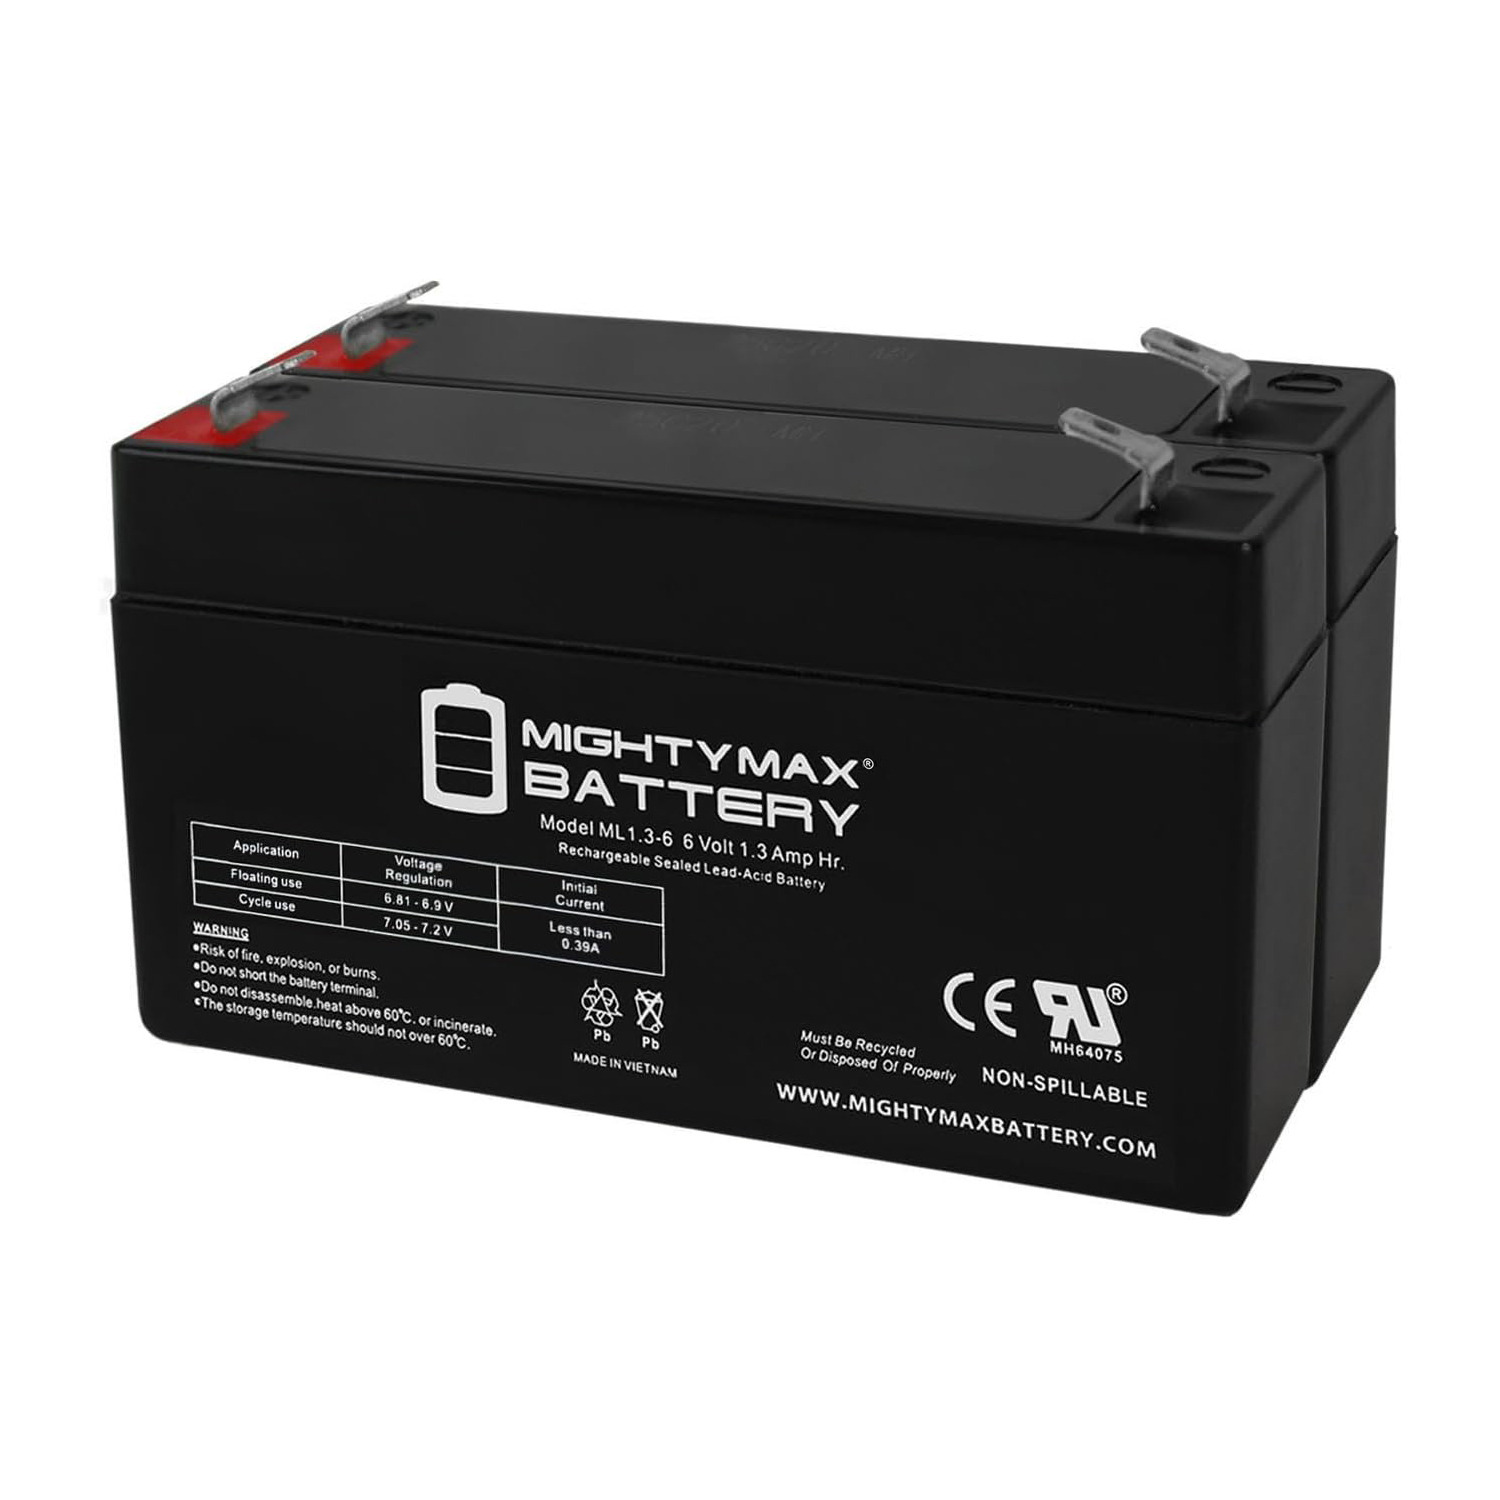 6V 1.3Ah SLA Replacement Battery for Unipower B11001 - 2 Pack